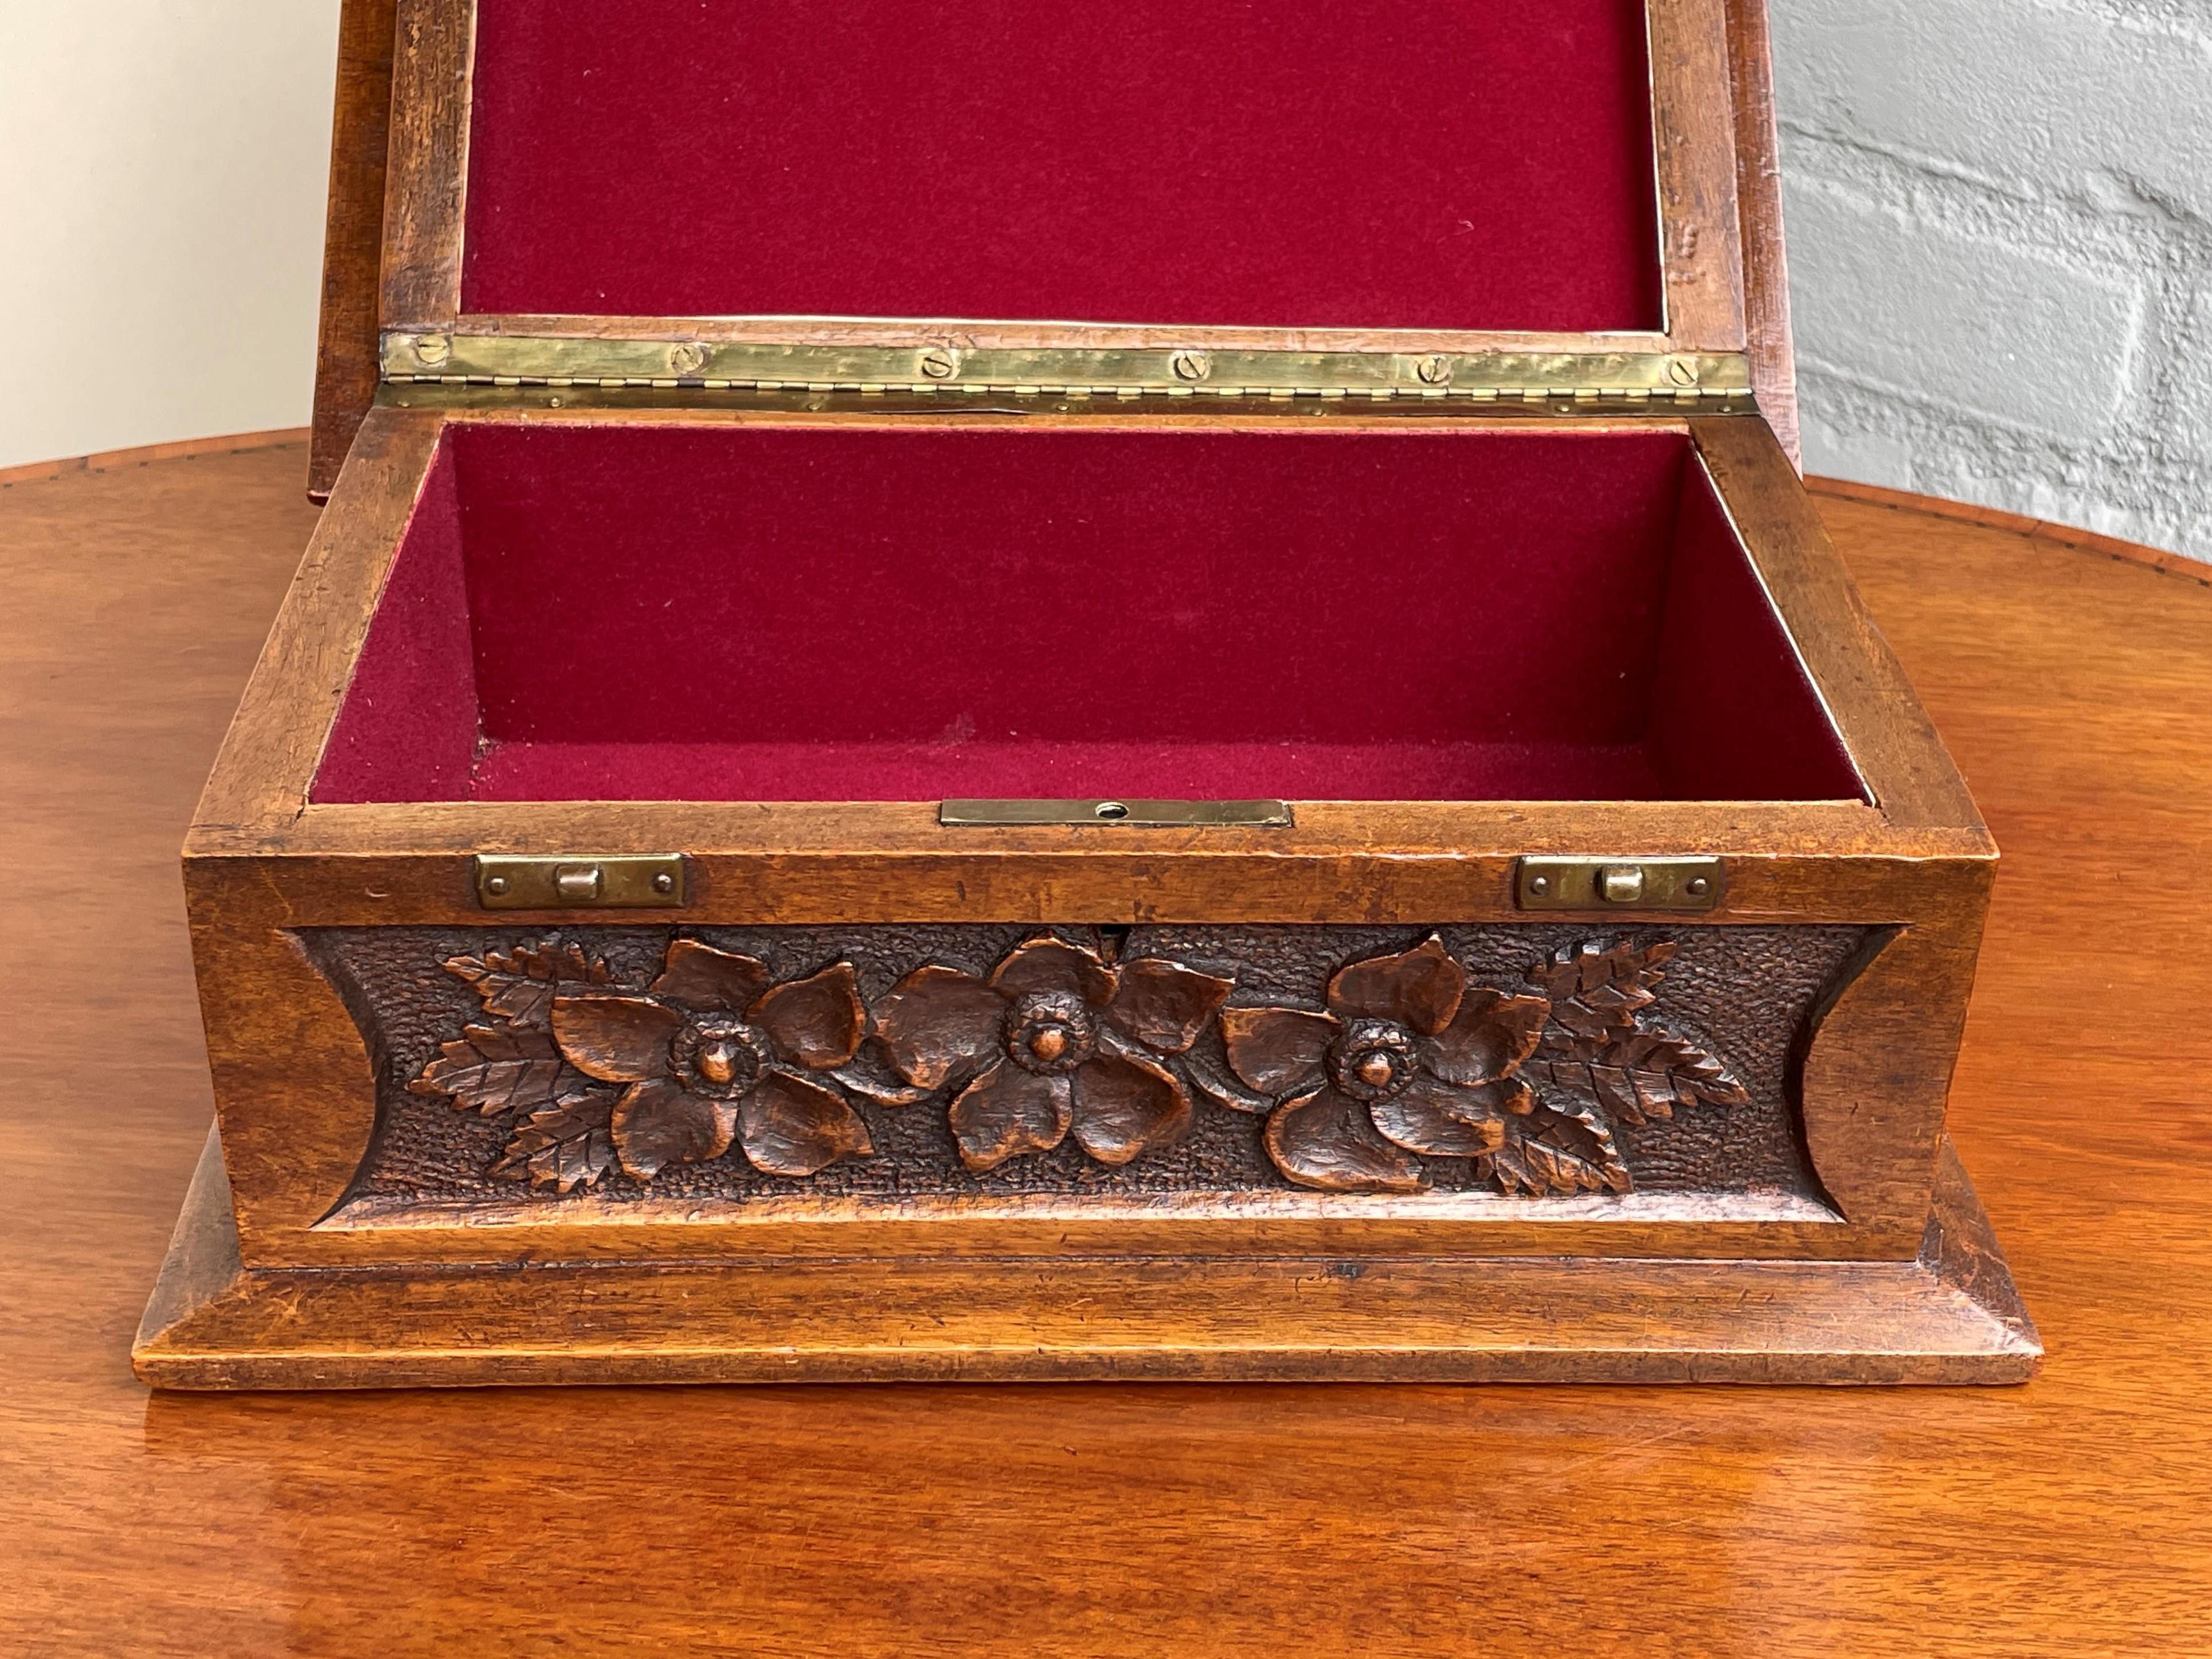 Hand-Carved Stunning Arts & Crafts Box with Hand Carved Deer Sculptures in Deep Relief, 1910